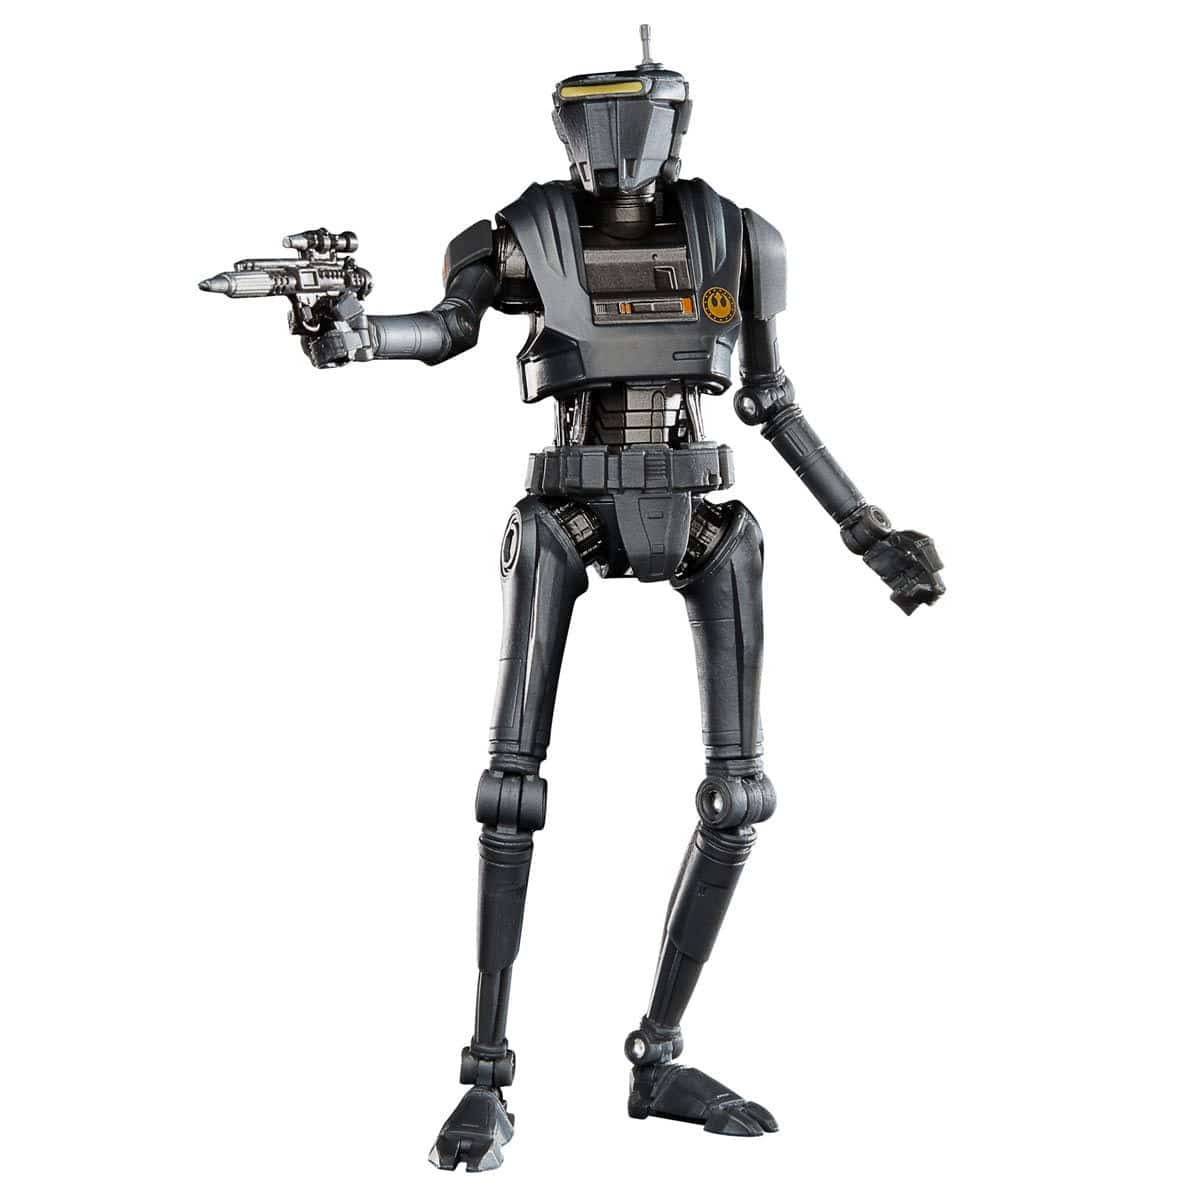 Star Wars The Black Series New Republic Security Droid 6-Inch Action Figure - Pop-O-Loco - Hasbro